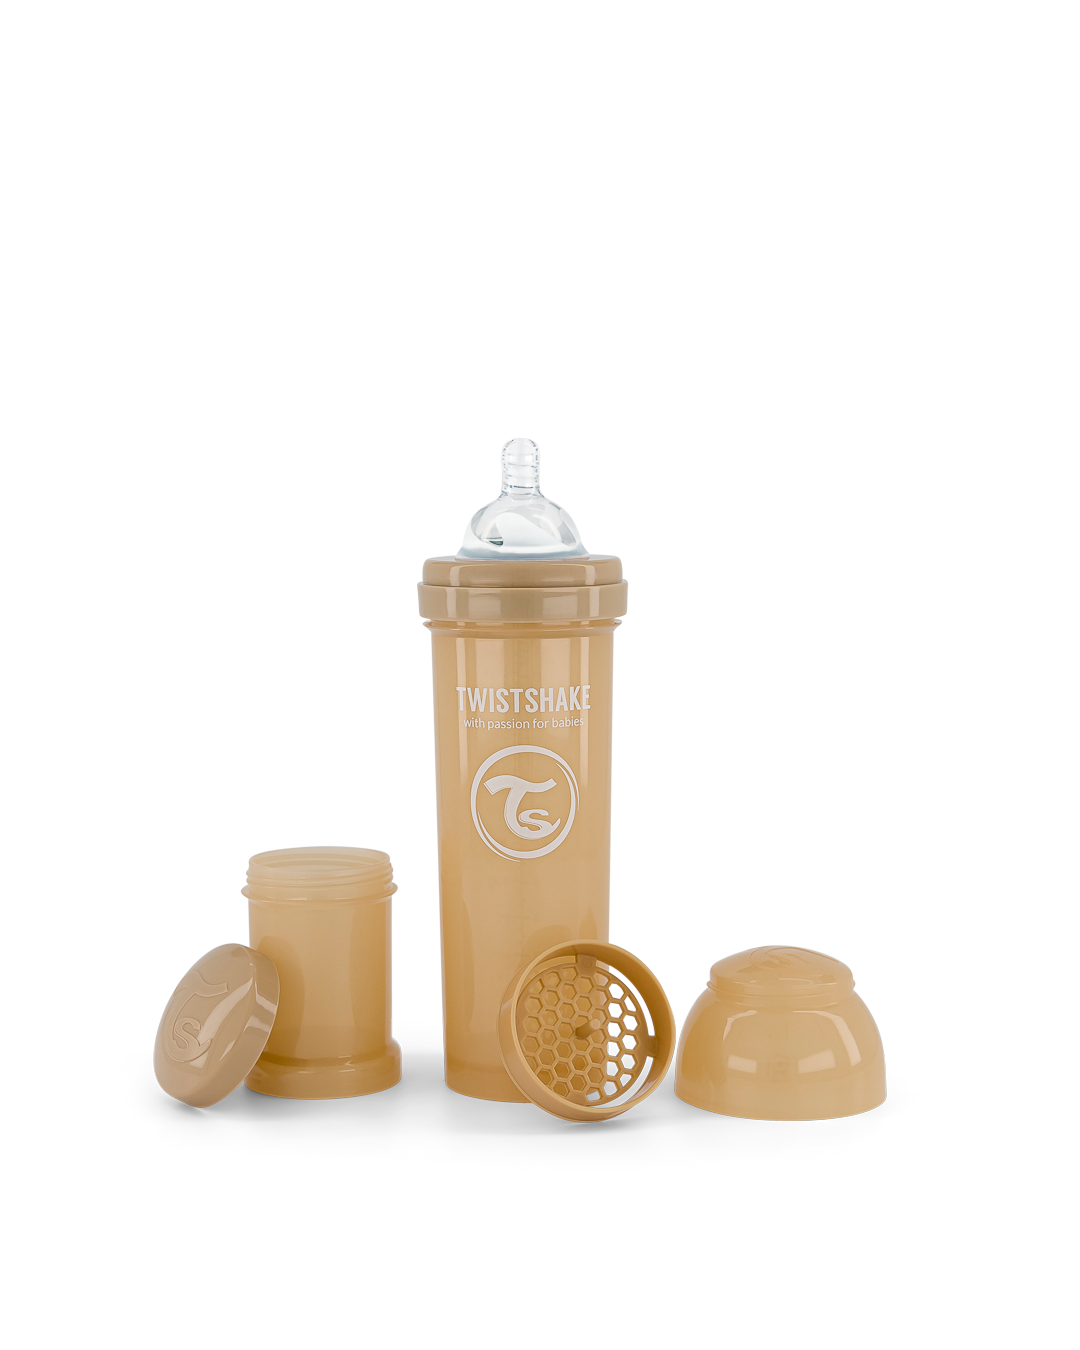  Twistshake Anti Colic Baby Bottles - Premium 330ml/11oz  Bottles with 100ml Milk Storage Container for a Comfortable Feeding  Experience for Baby Care - Pastel Grey : Baby